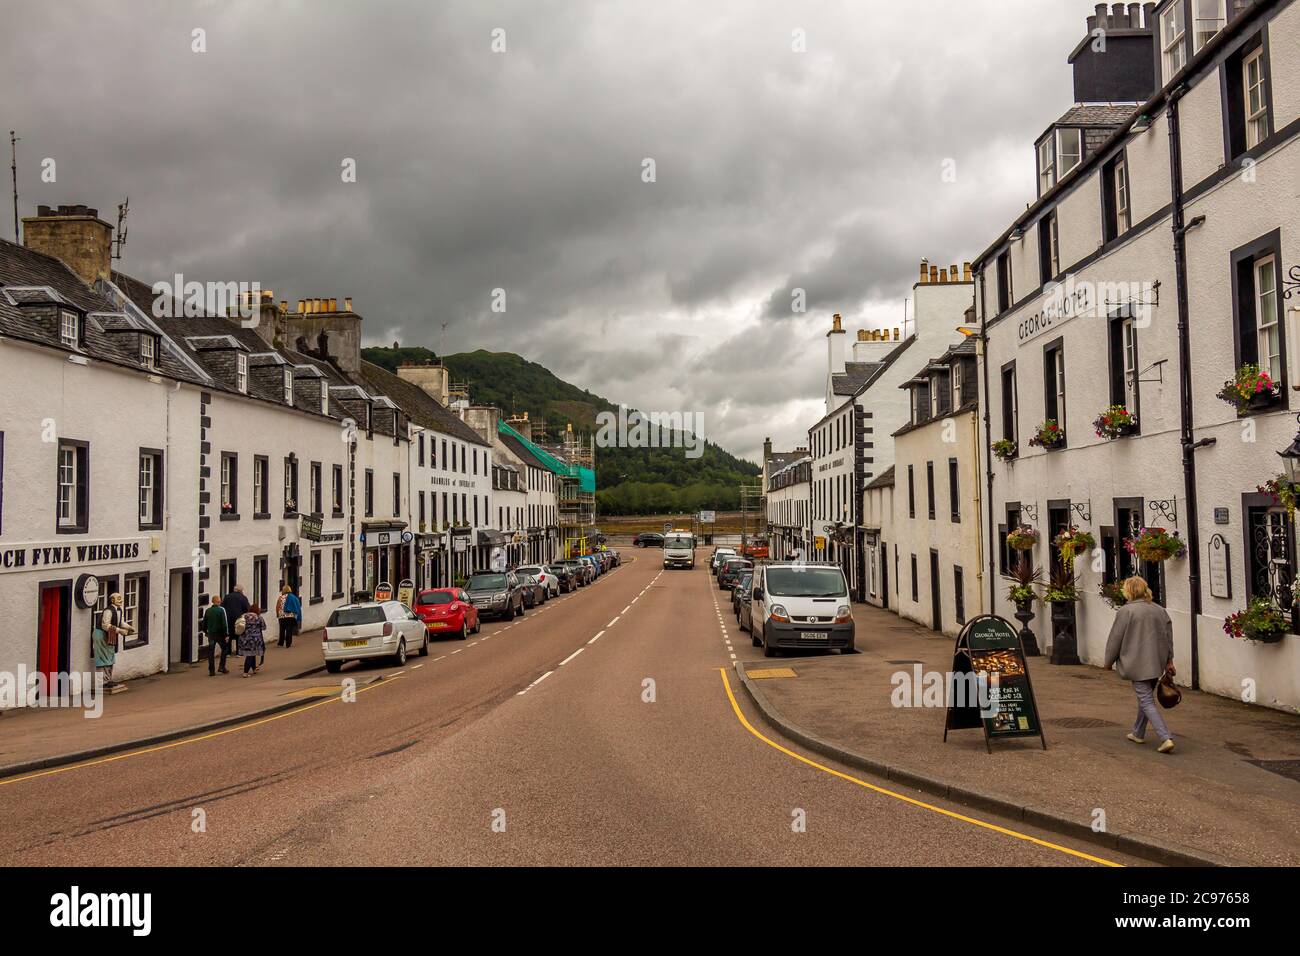 Inveraray, Scotland - July 14th 2016: The Main Street of the West Coast of Scotland town of Inverarary on cloudy summers day in Argyll, Scotland Stock Photo